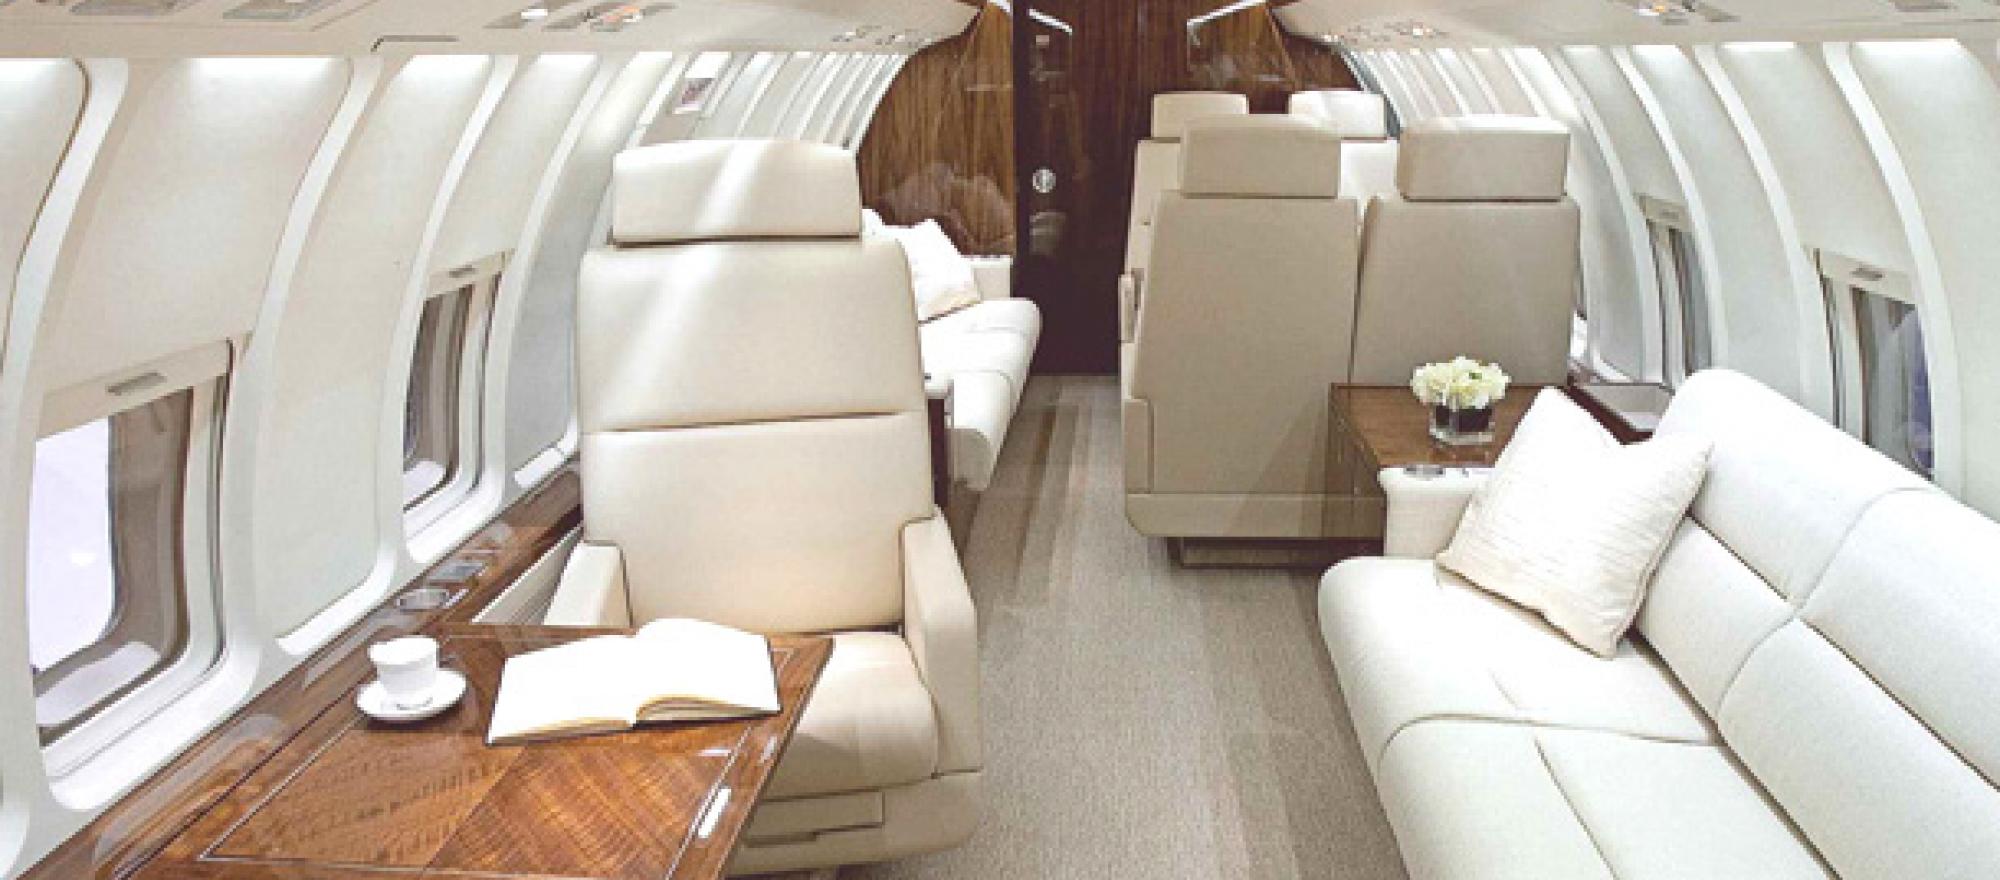 You end up with nearly the equivalent of a new $53.25 million Global Express 